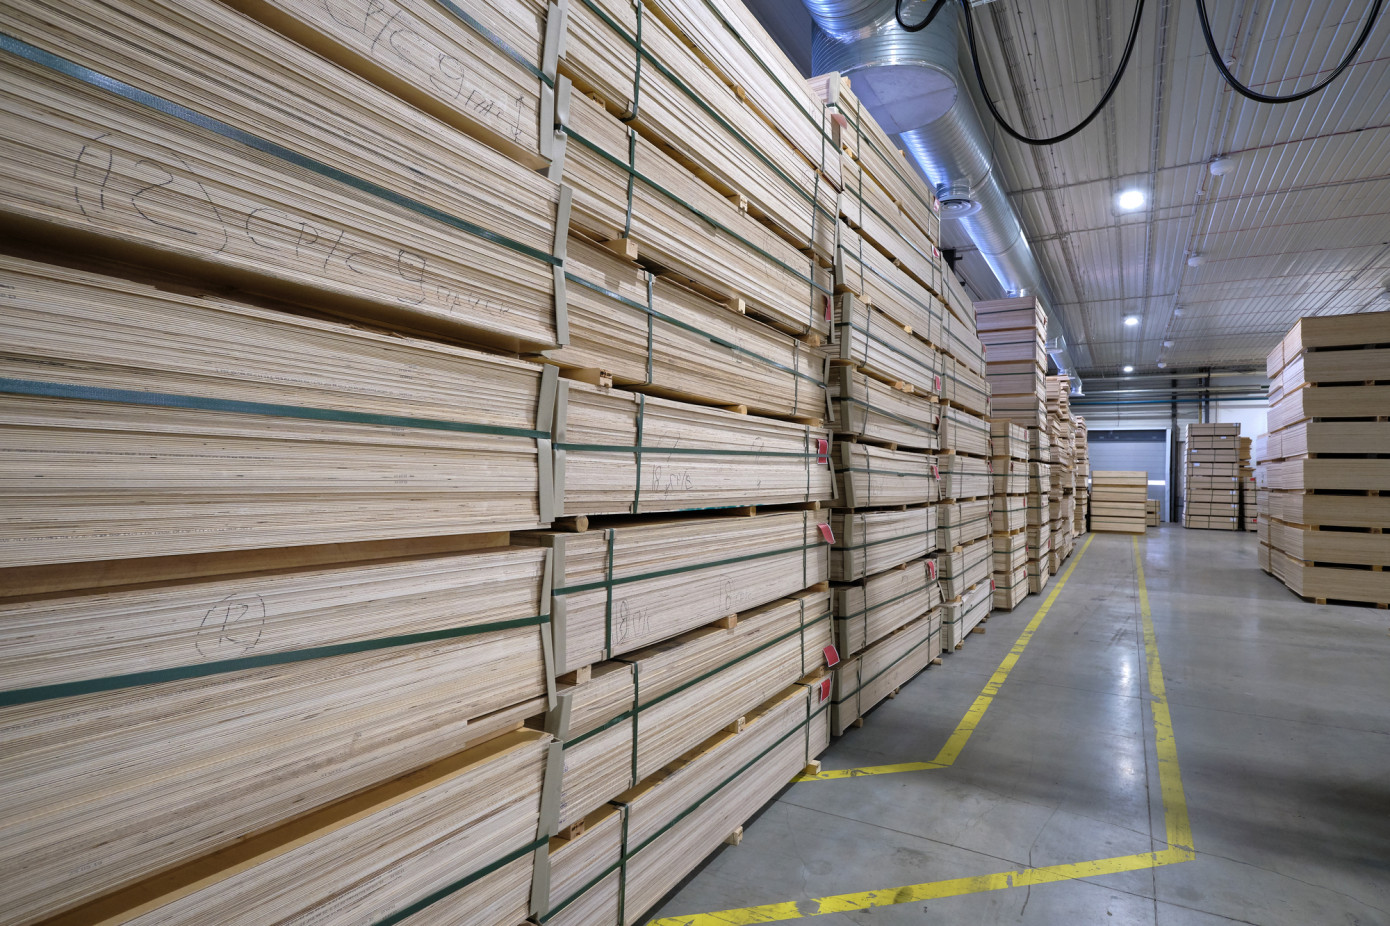 In February, price for plywood imported to European Union gains 4%